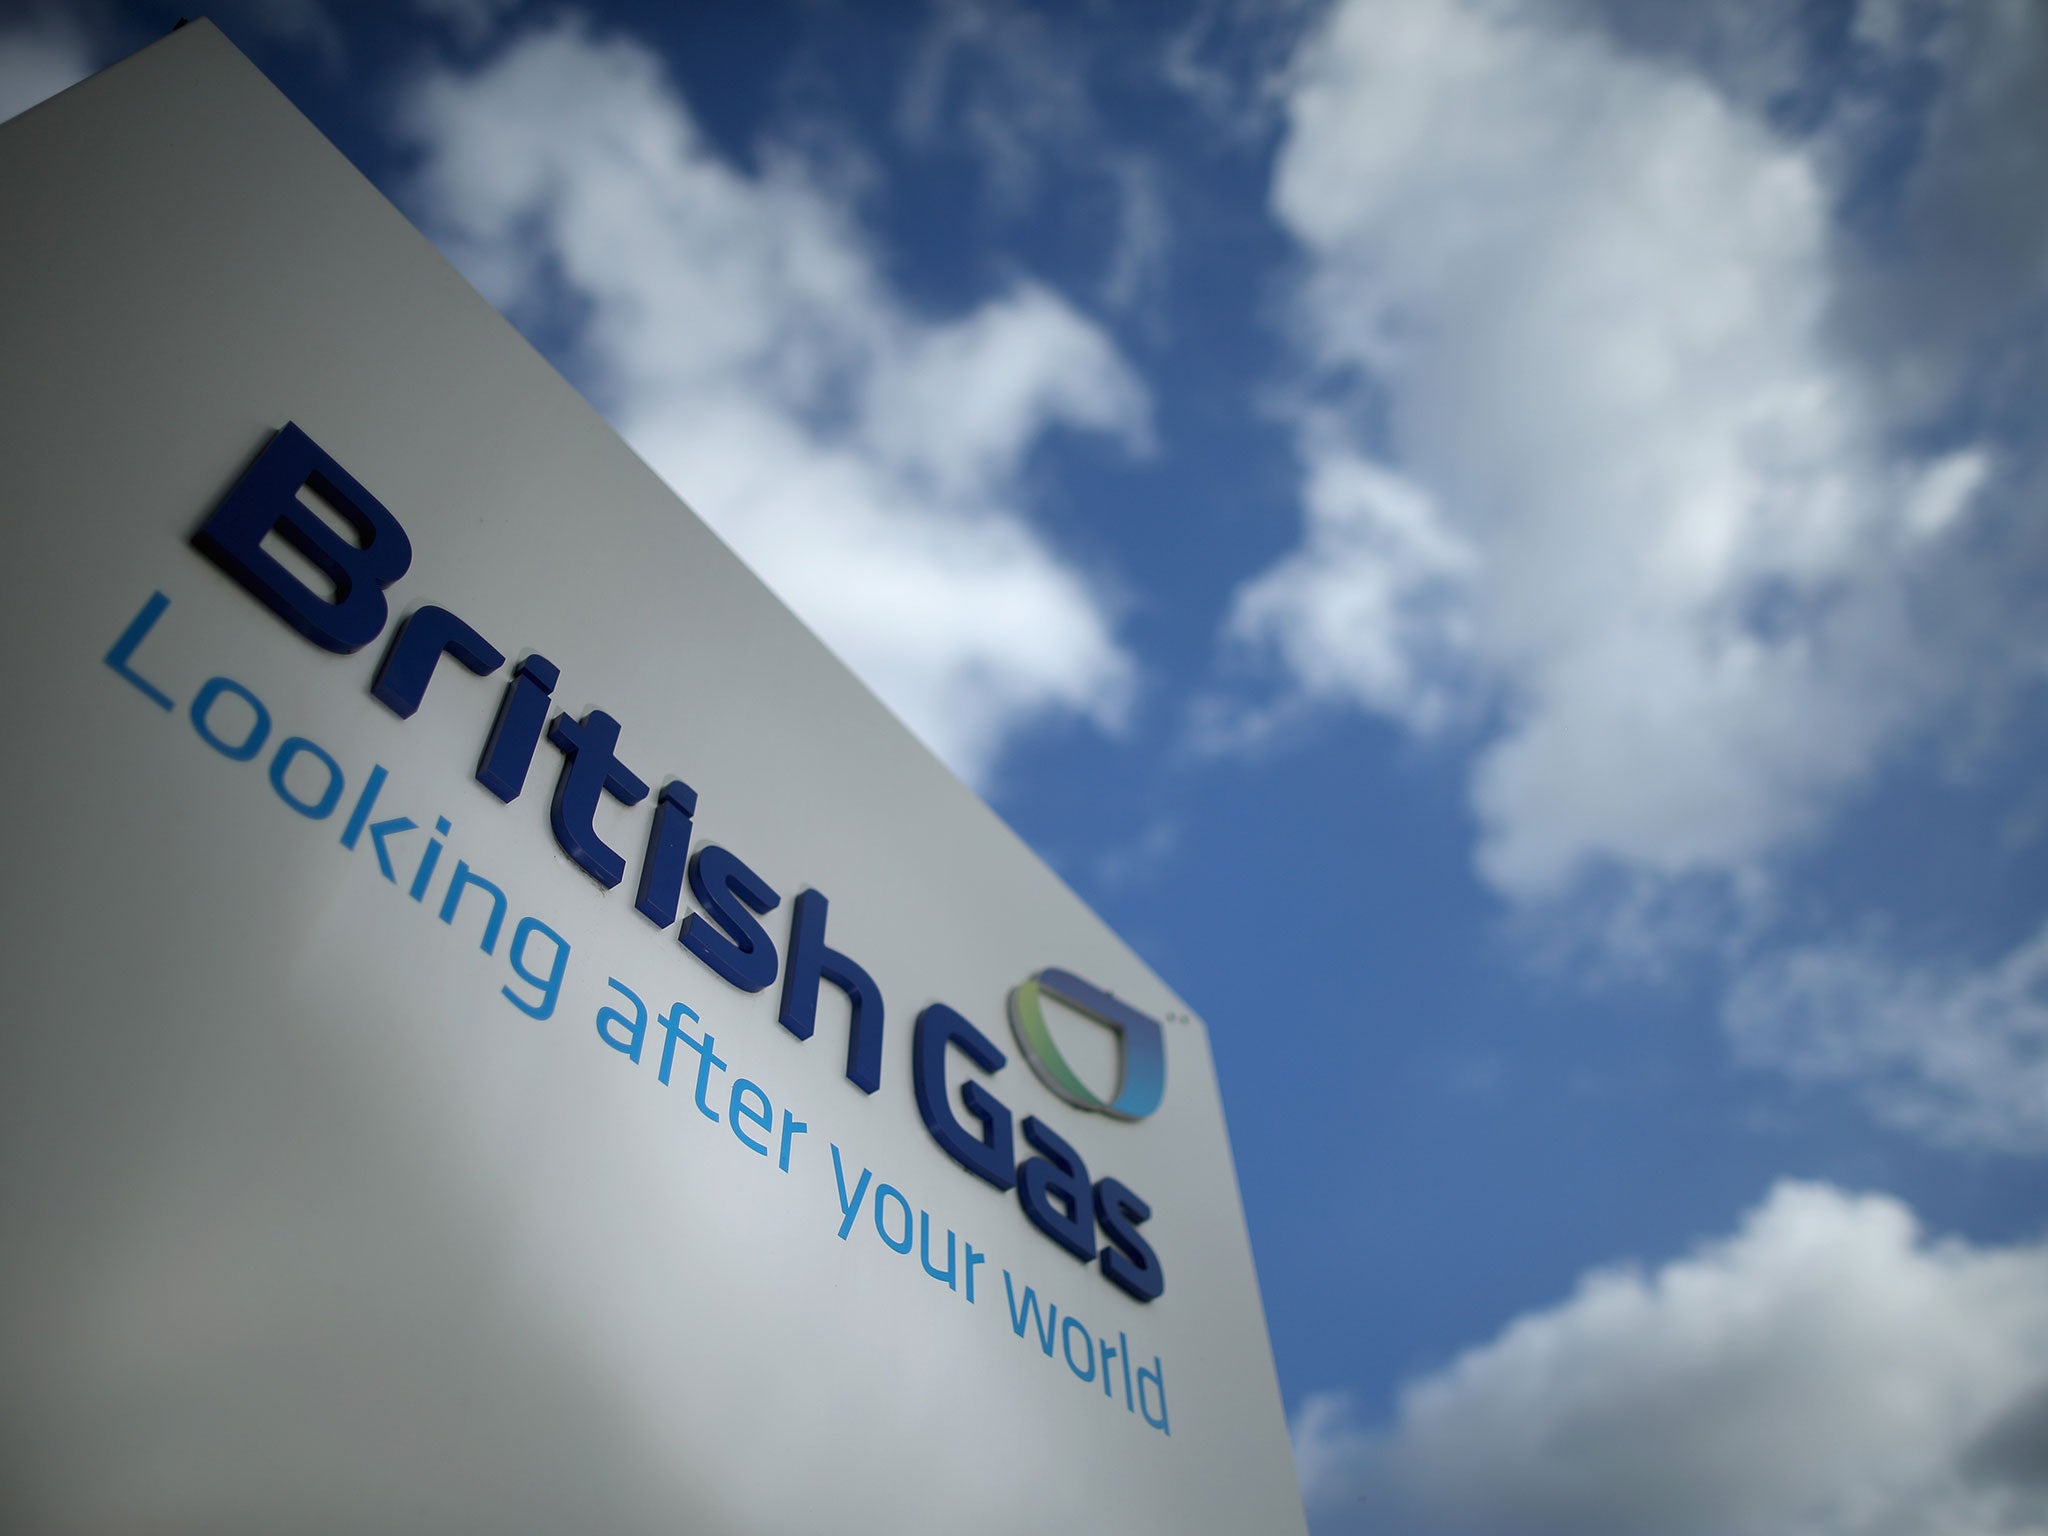 British Gas already owned a 21 per cent stake in the company and is set to pay £44m for the remainder